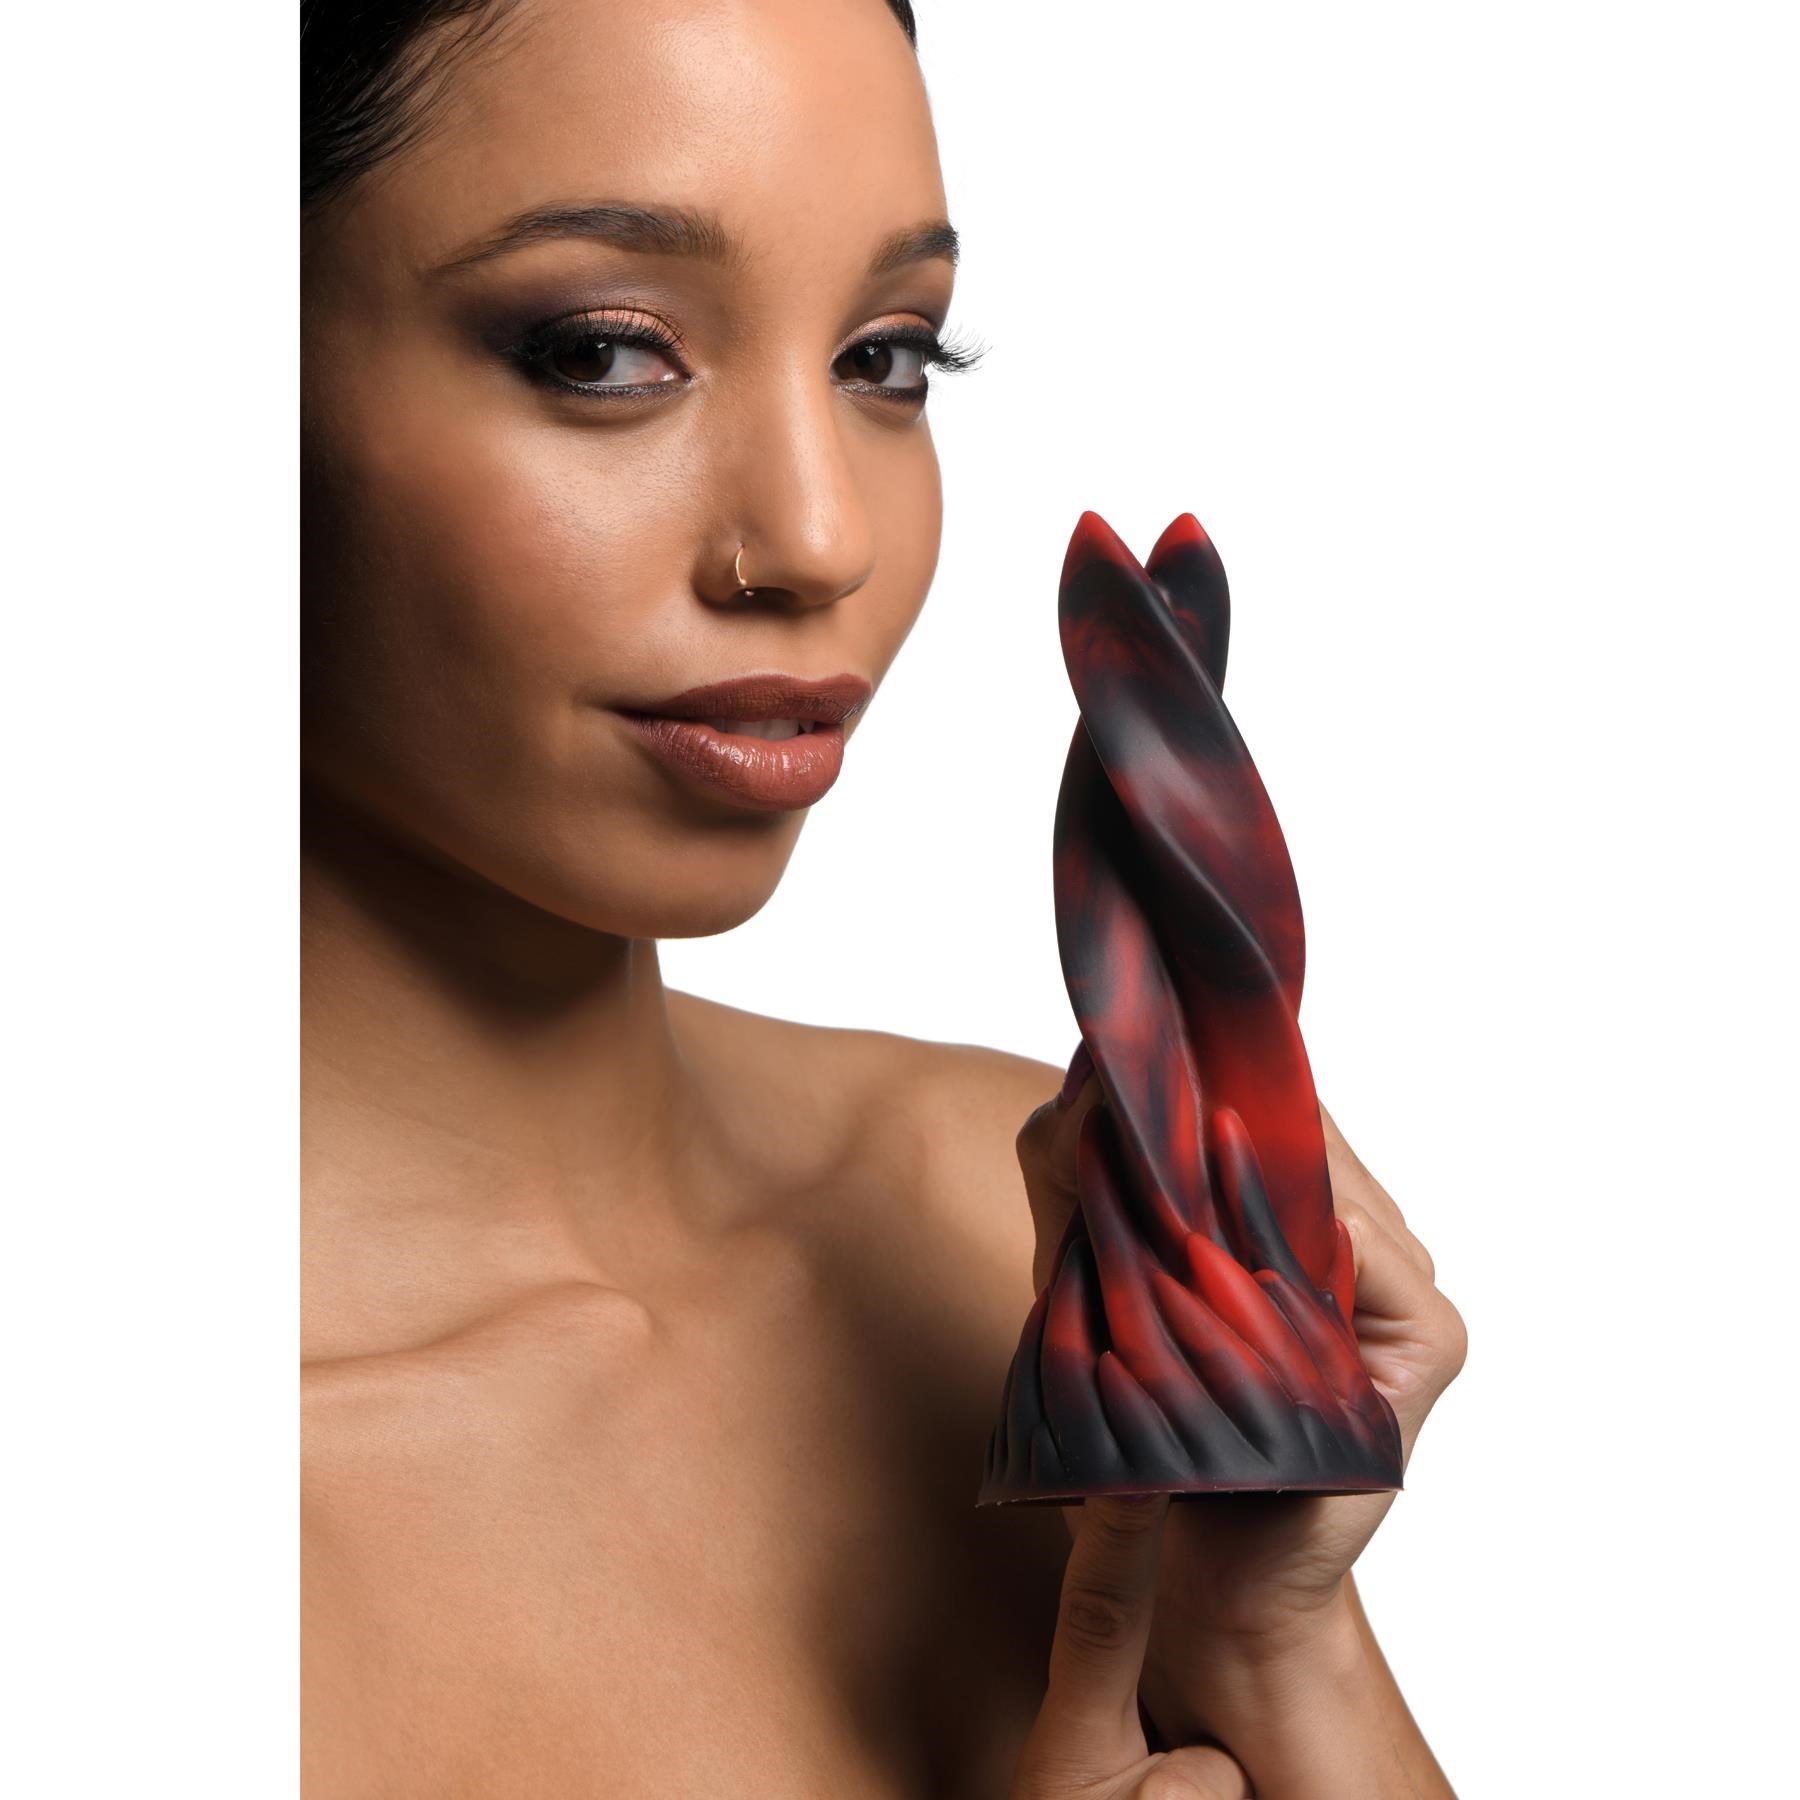 CreatureCocks Hell Kiss Twisted Tongue Dildo model holding